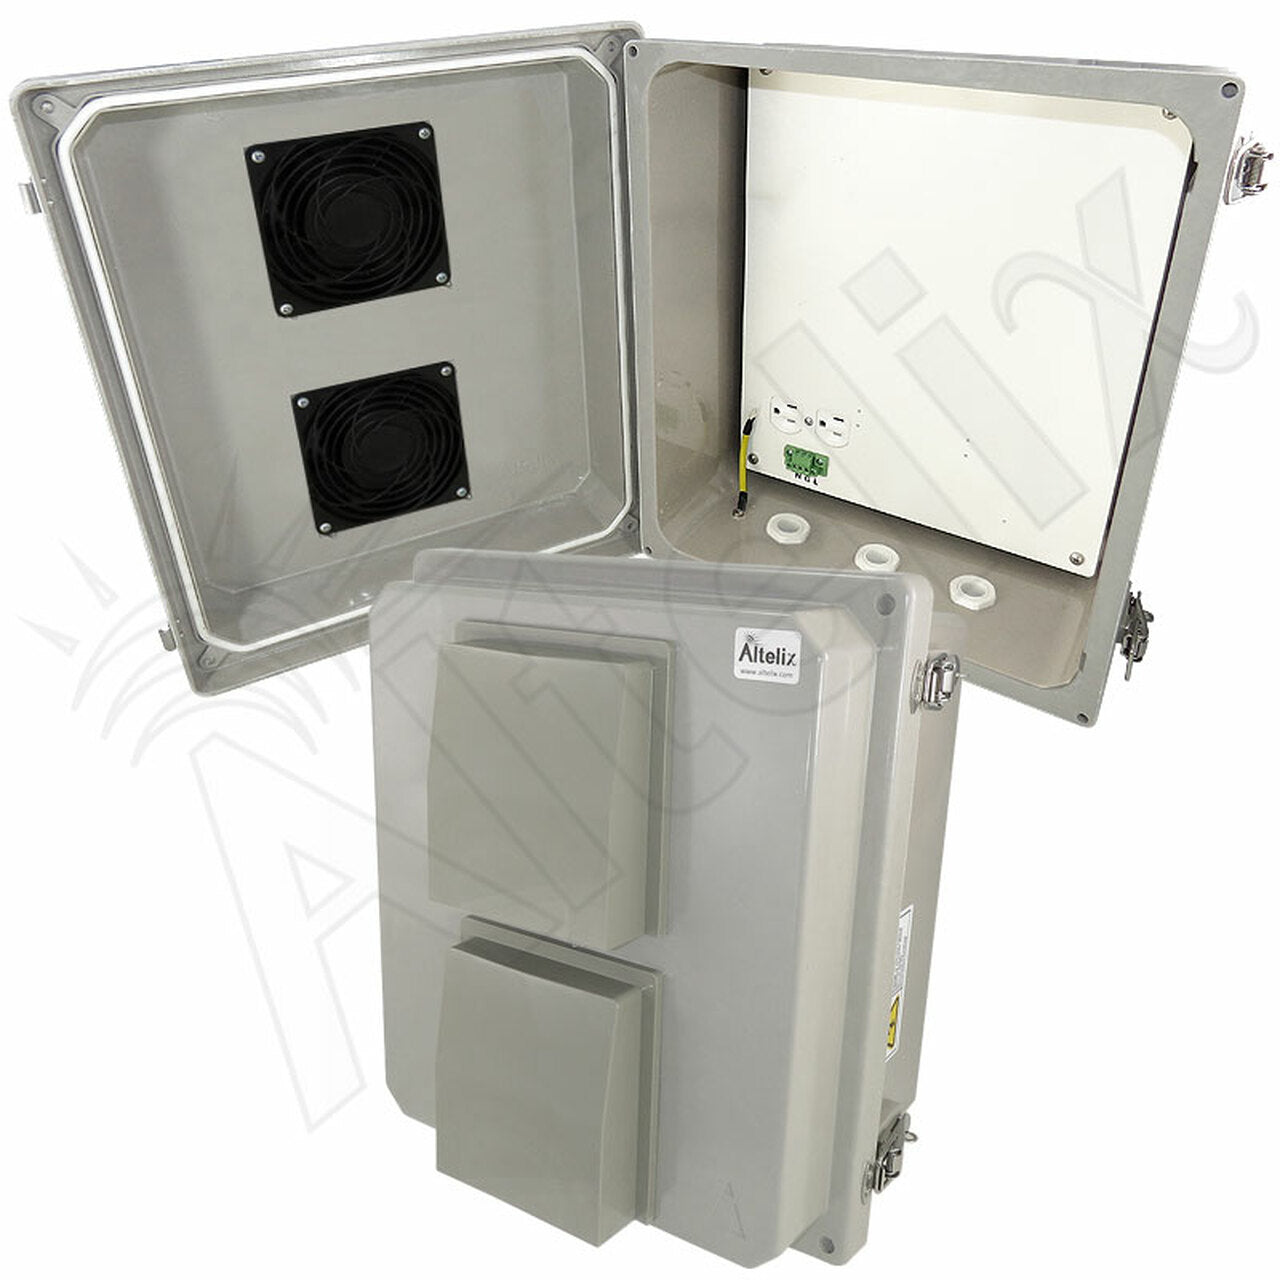 Altelix 14x12x8 Fiberglass Weatherproof Vented WiFi NEMA Enclosure with 120 VAC Outlets and Non-Metallic Equipment Mounting Plate